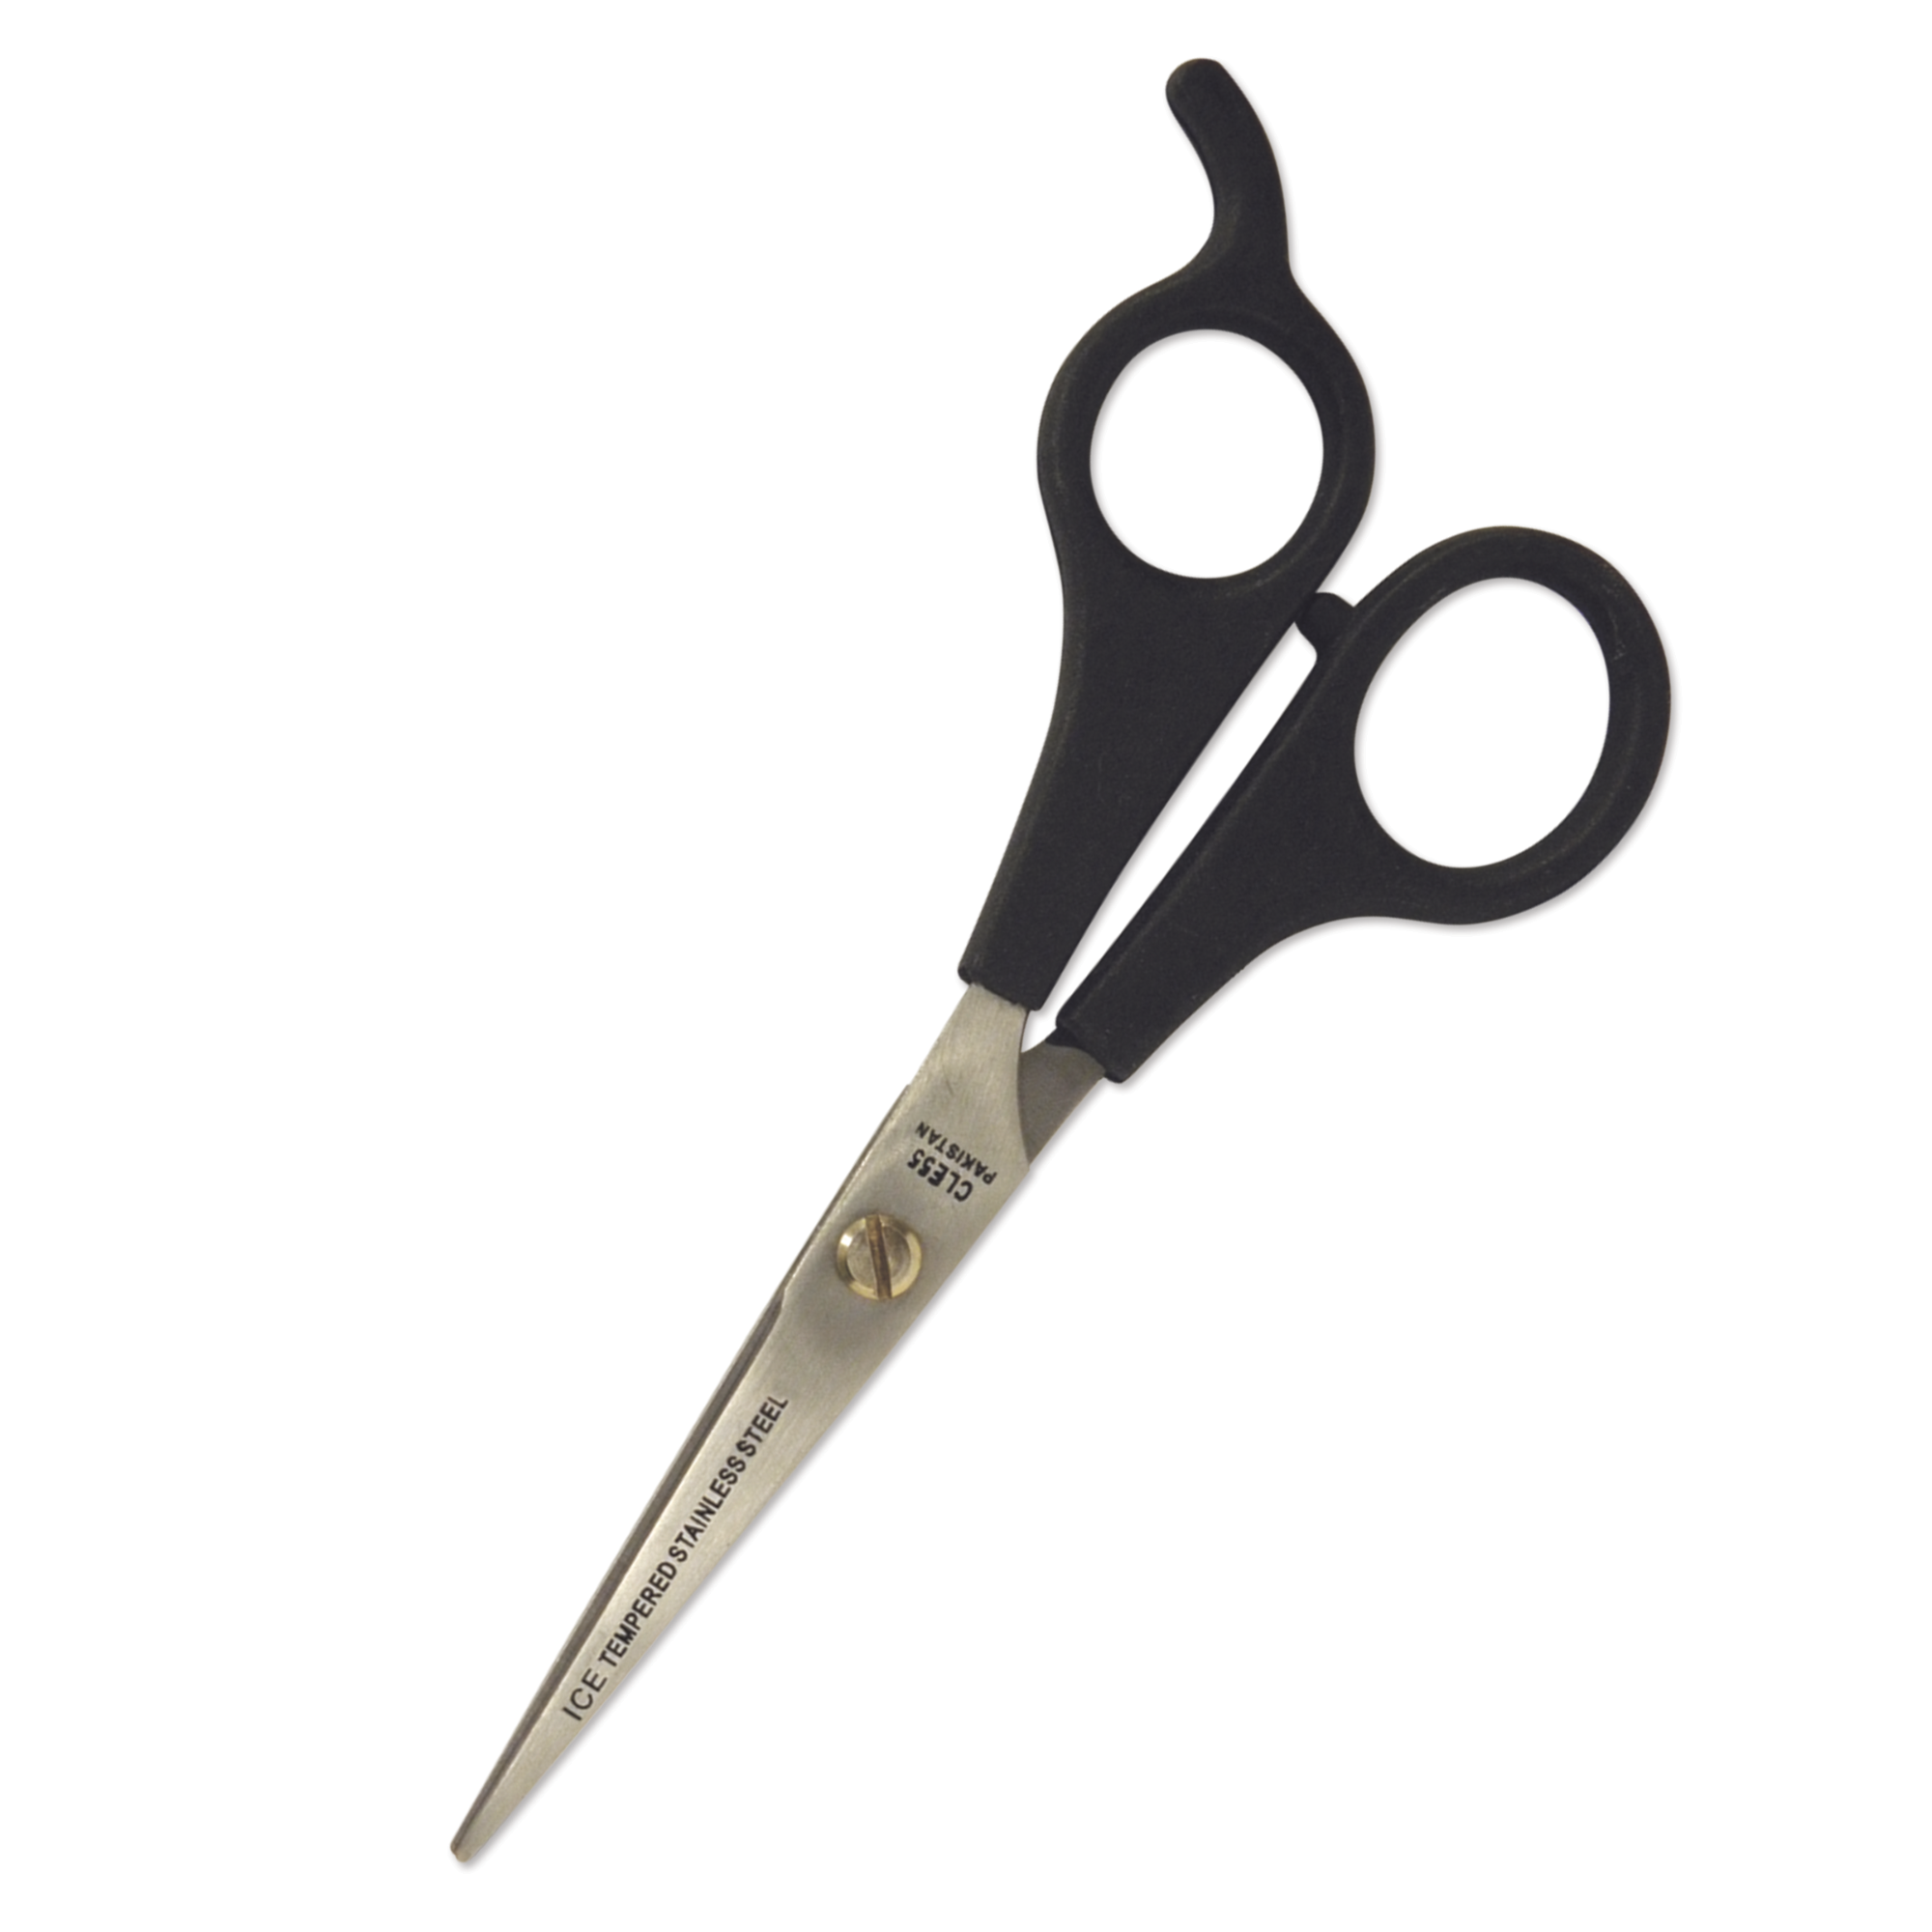 5-1/2" Ice-Tempered Stainless Steel Shear